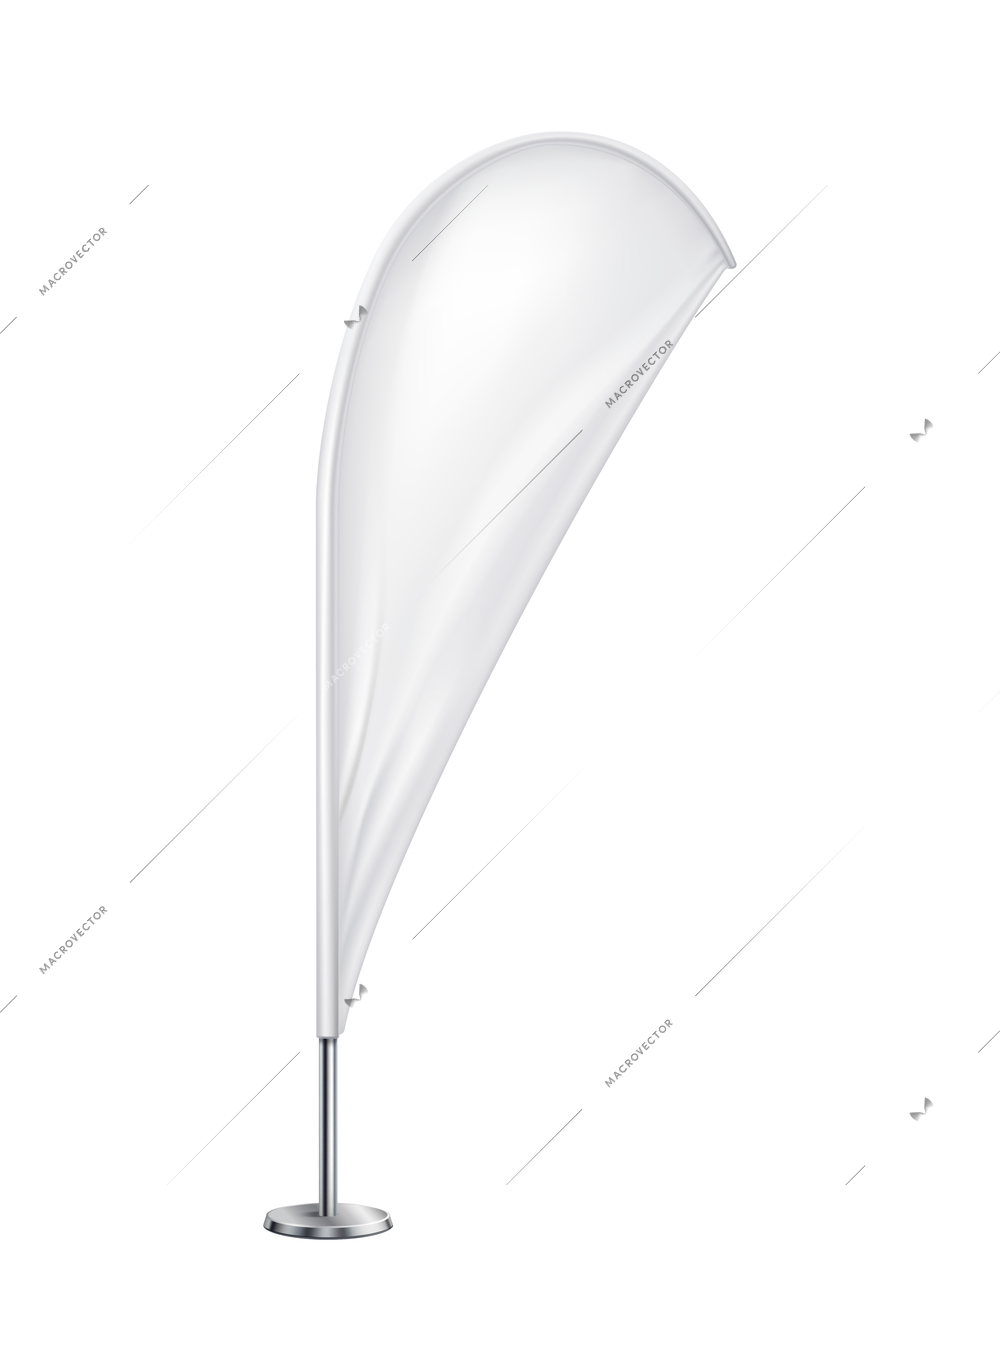 Realistic white advertising pennant on steel pole vector illustration